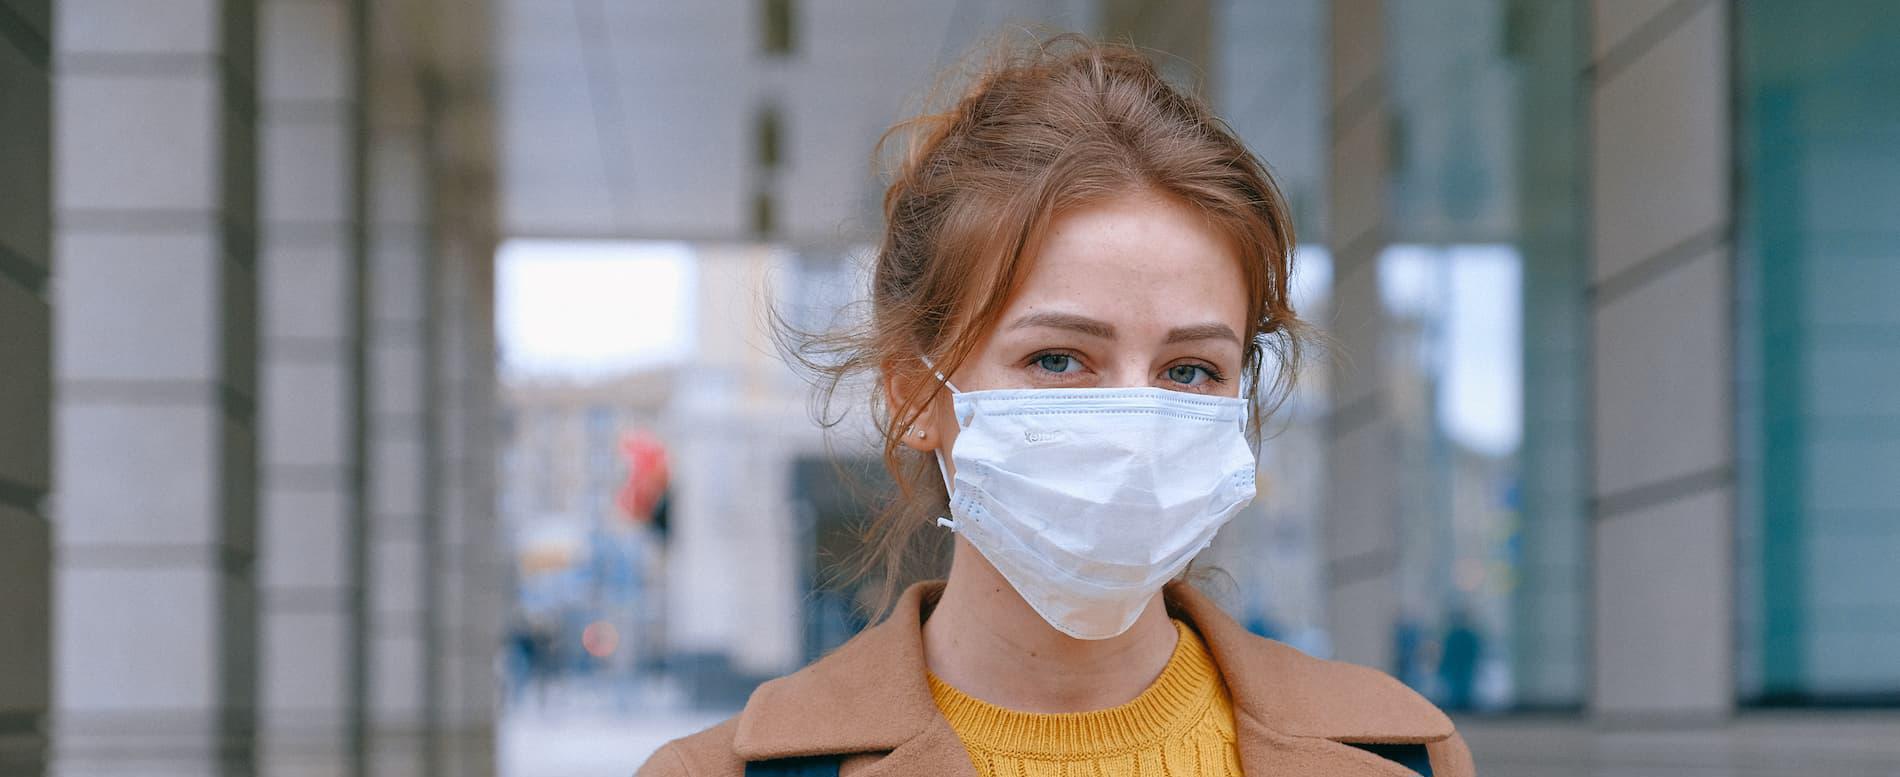 Woman wearing surgical face mask